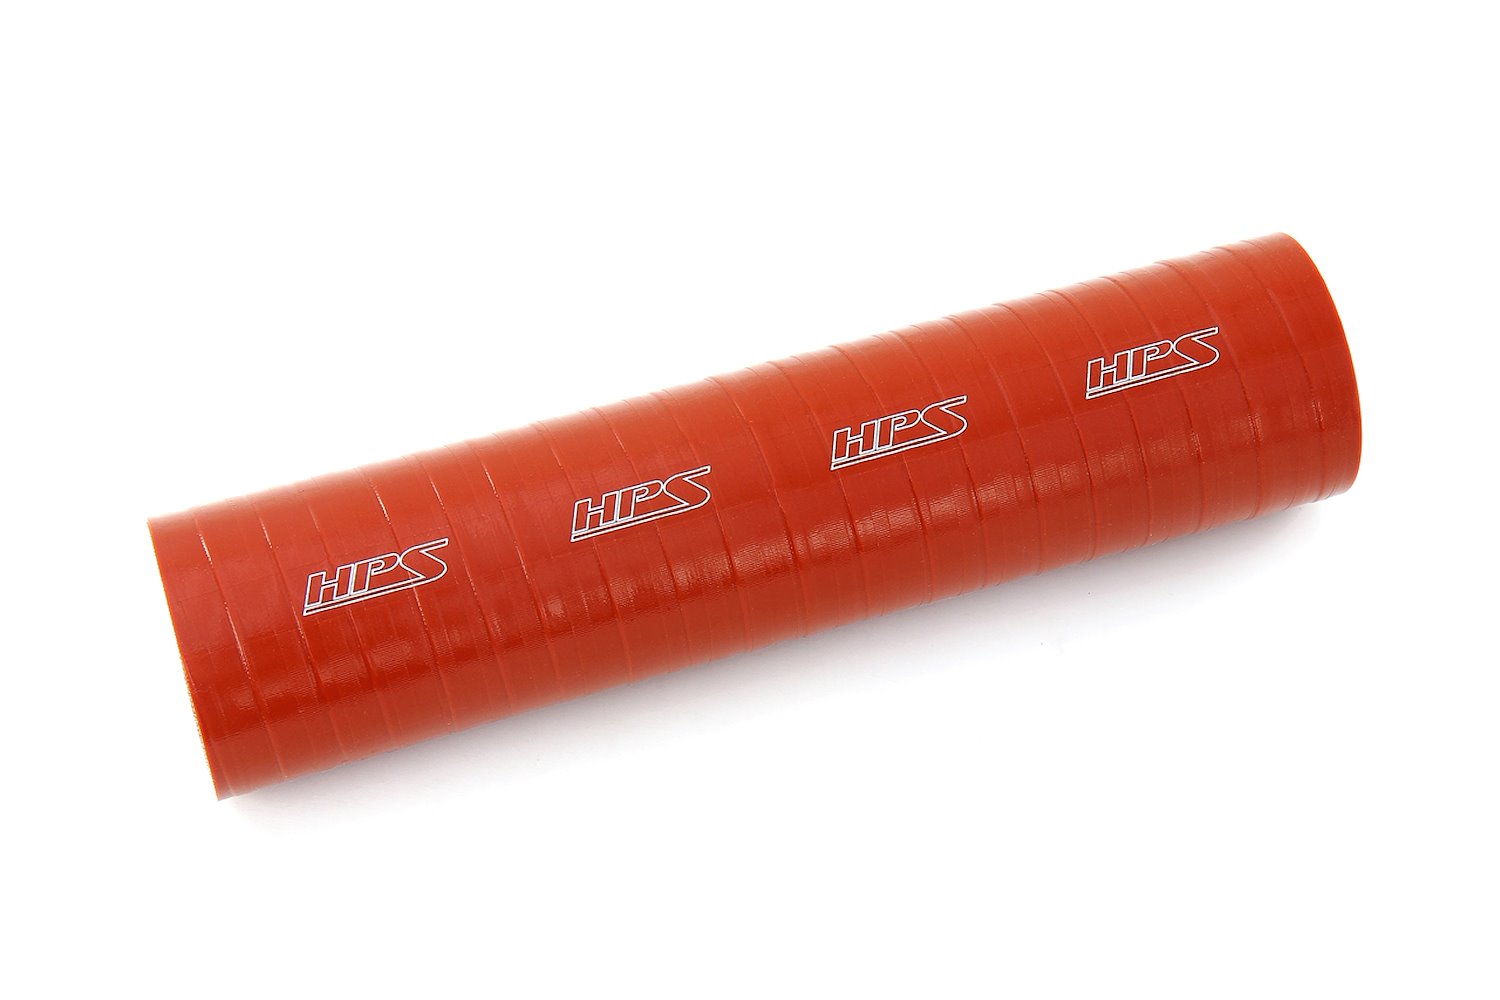 ST-125-HOT Silicone Coupler Hose, Ultra High-Temp 4-Ply Reinforced, 1-1/4 in. ID, 1 ft. Long